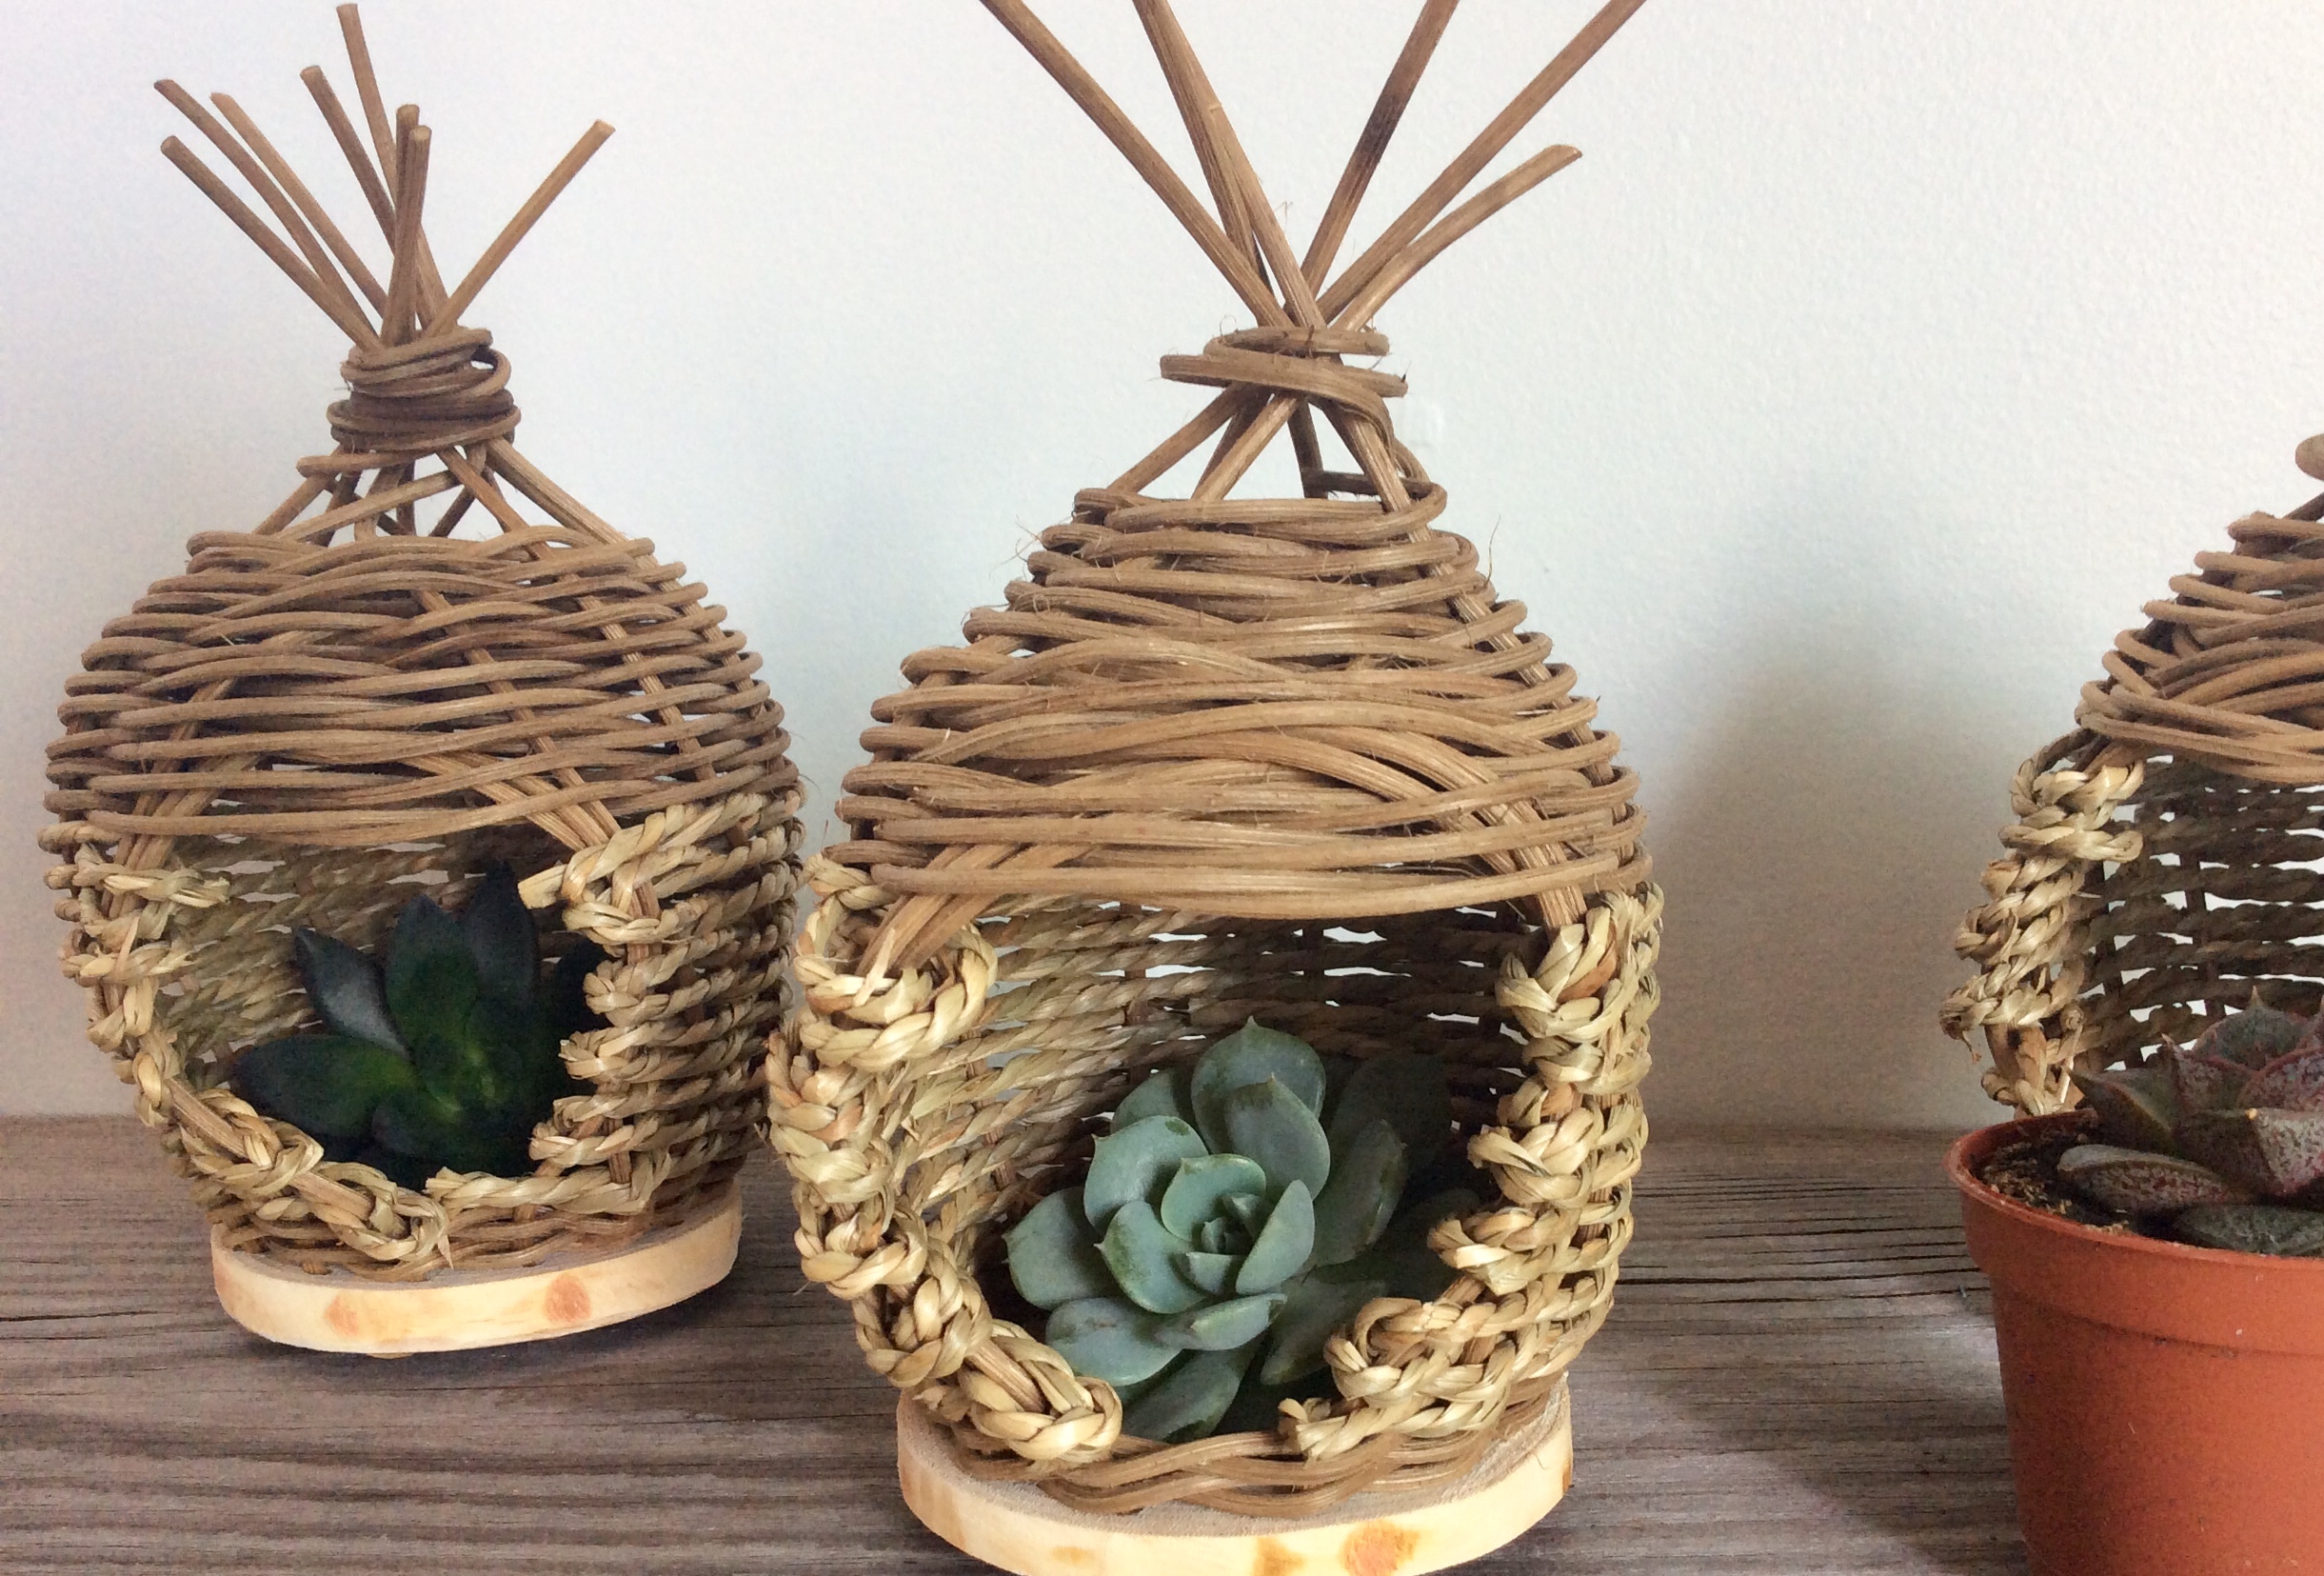 You are currently viewing Woven Air Planters with Amy Dugas